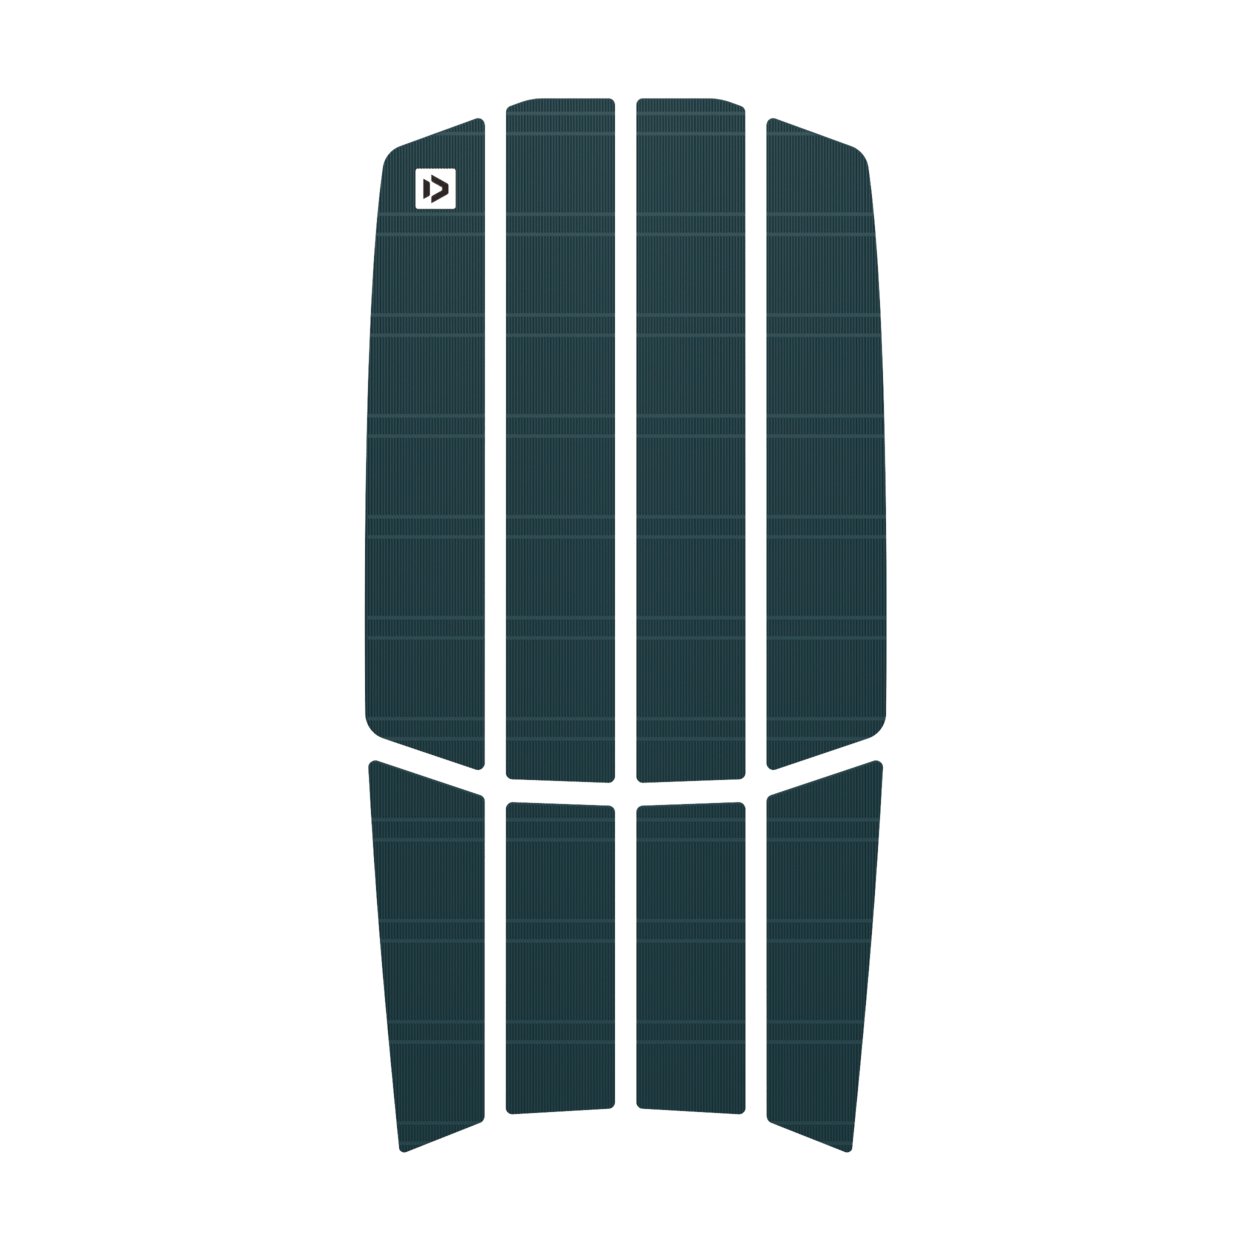 Duotone Traction Pad Team Front 2024 - Worthing Watersports - 9008415856251 - Surfboards - Duotone Kiteboarding